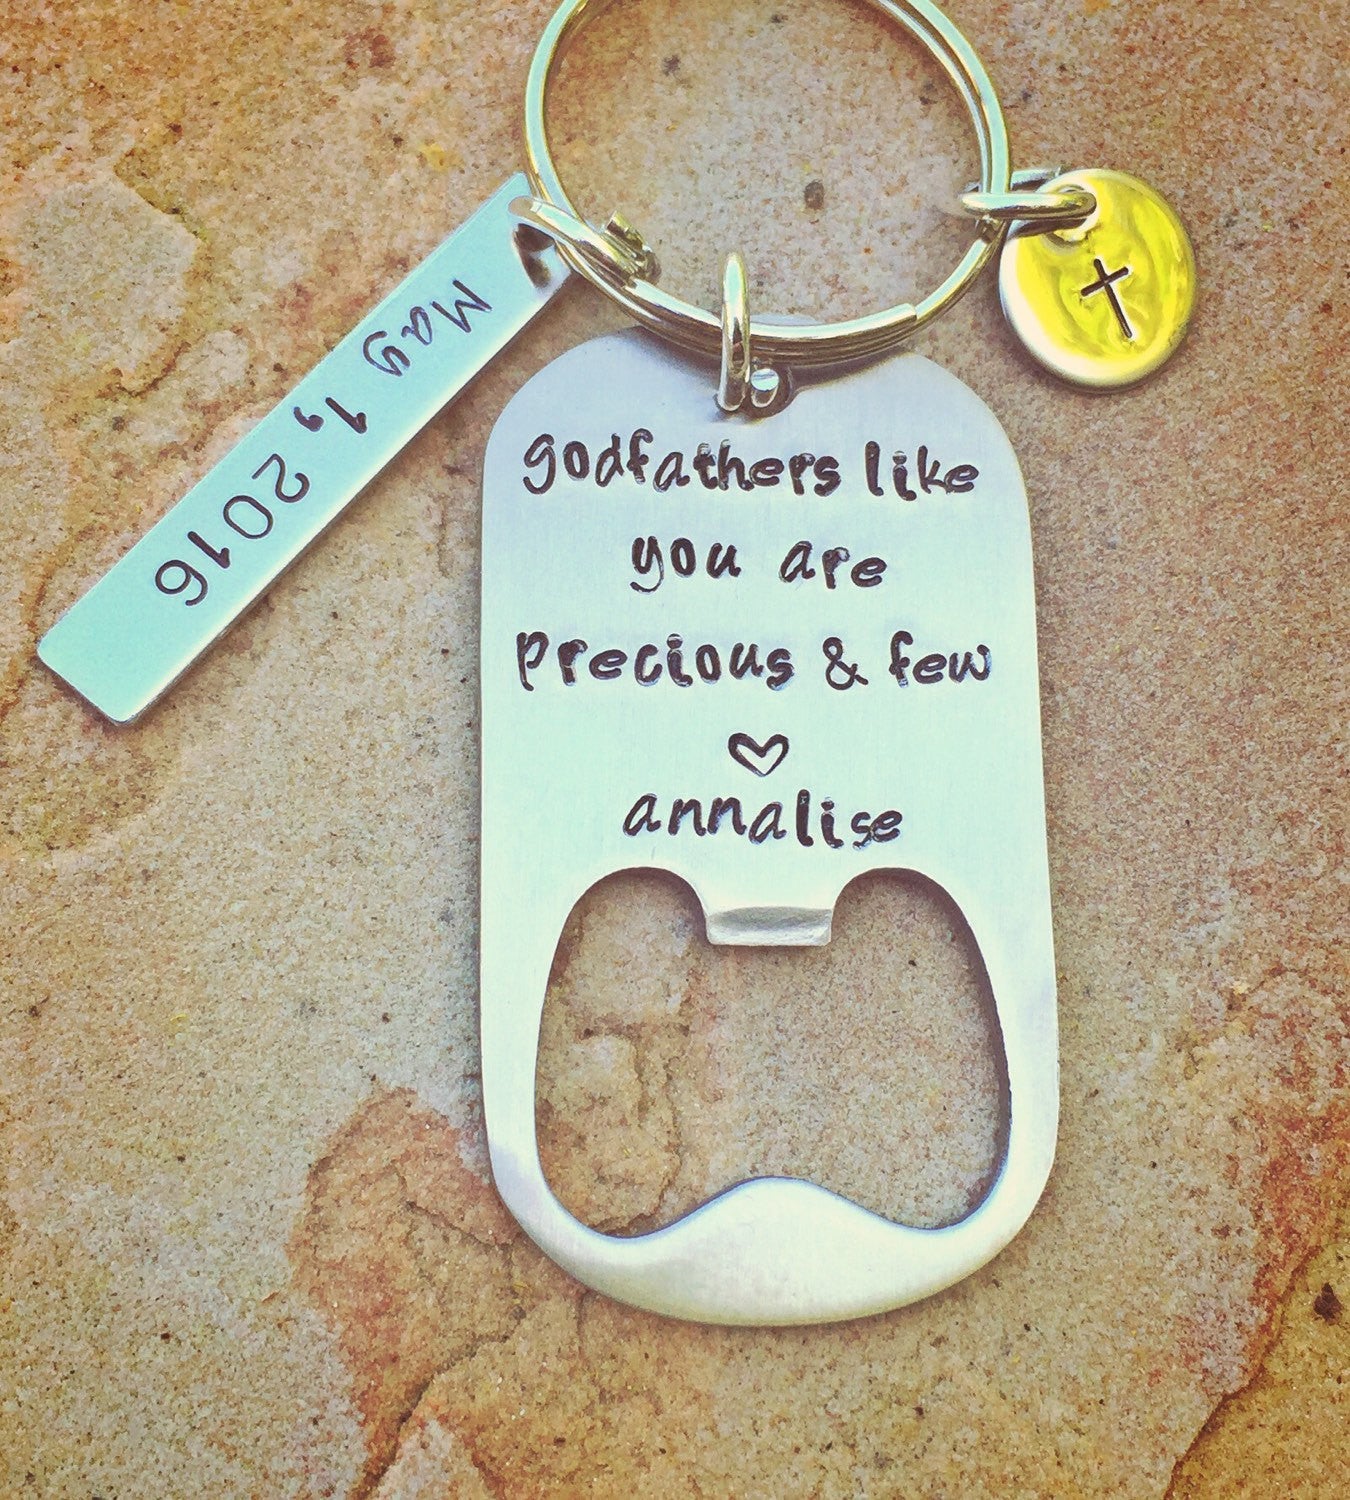 Best Daddy Keychain - Natashaaloha, jewelry, bracelets, necklace, keychains, fishing lures, gifts for men, charms, personalized, 